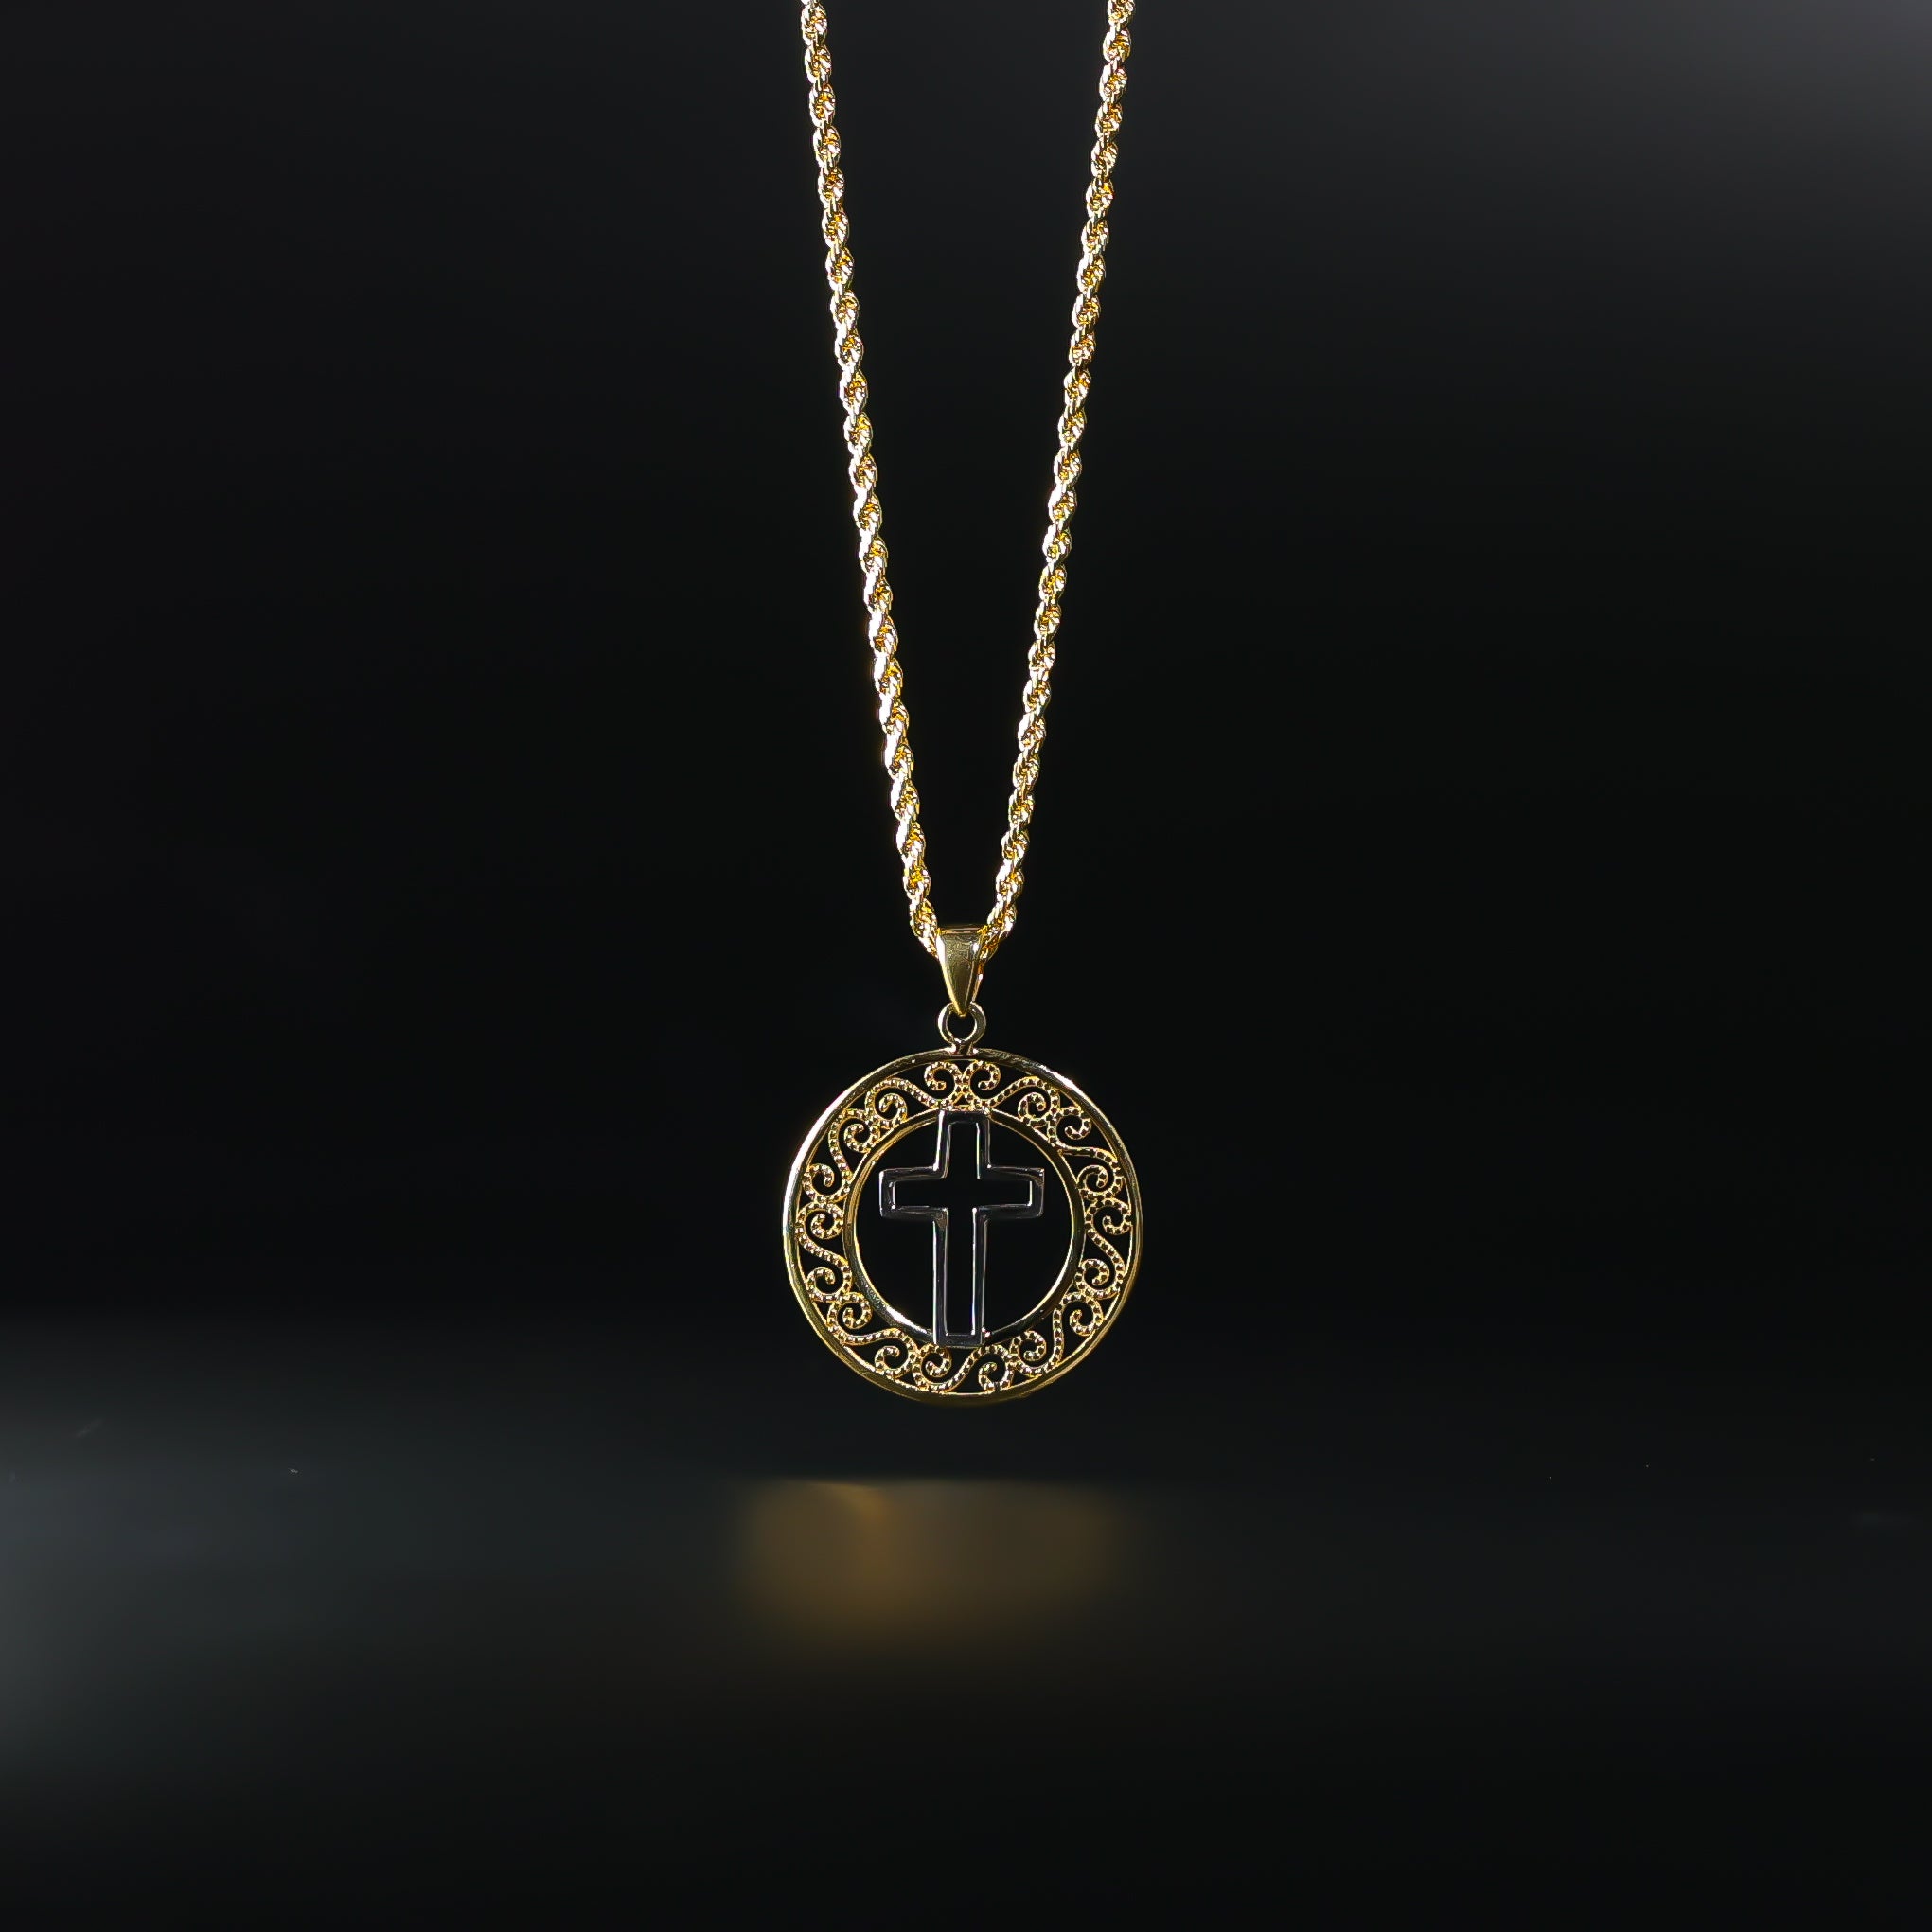 Gold 2 Tone Round Pendant with Cross Pendant Model-2230 - Charlie & Co. Jewelry